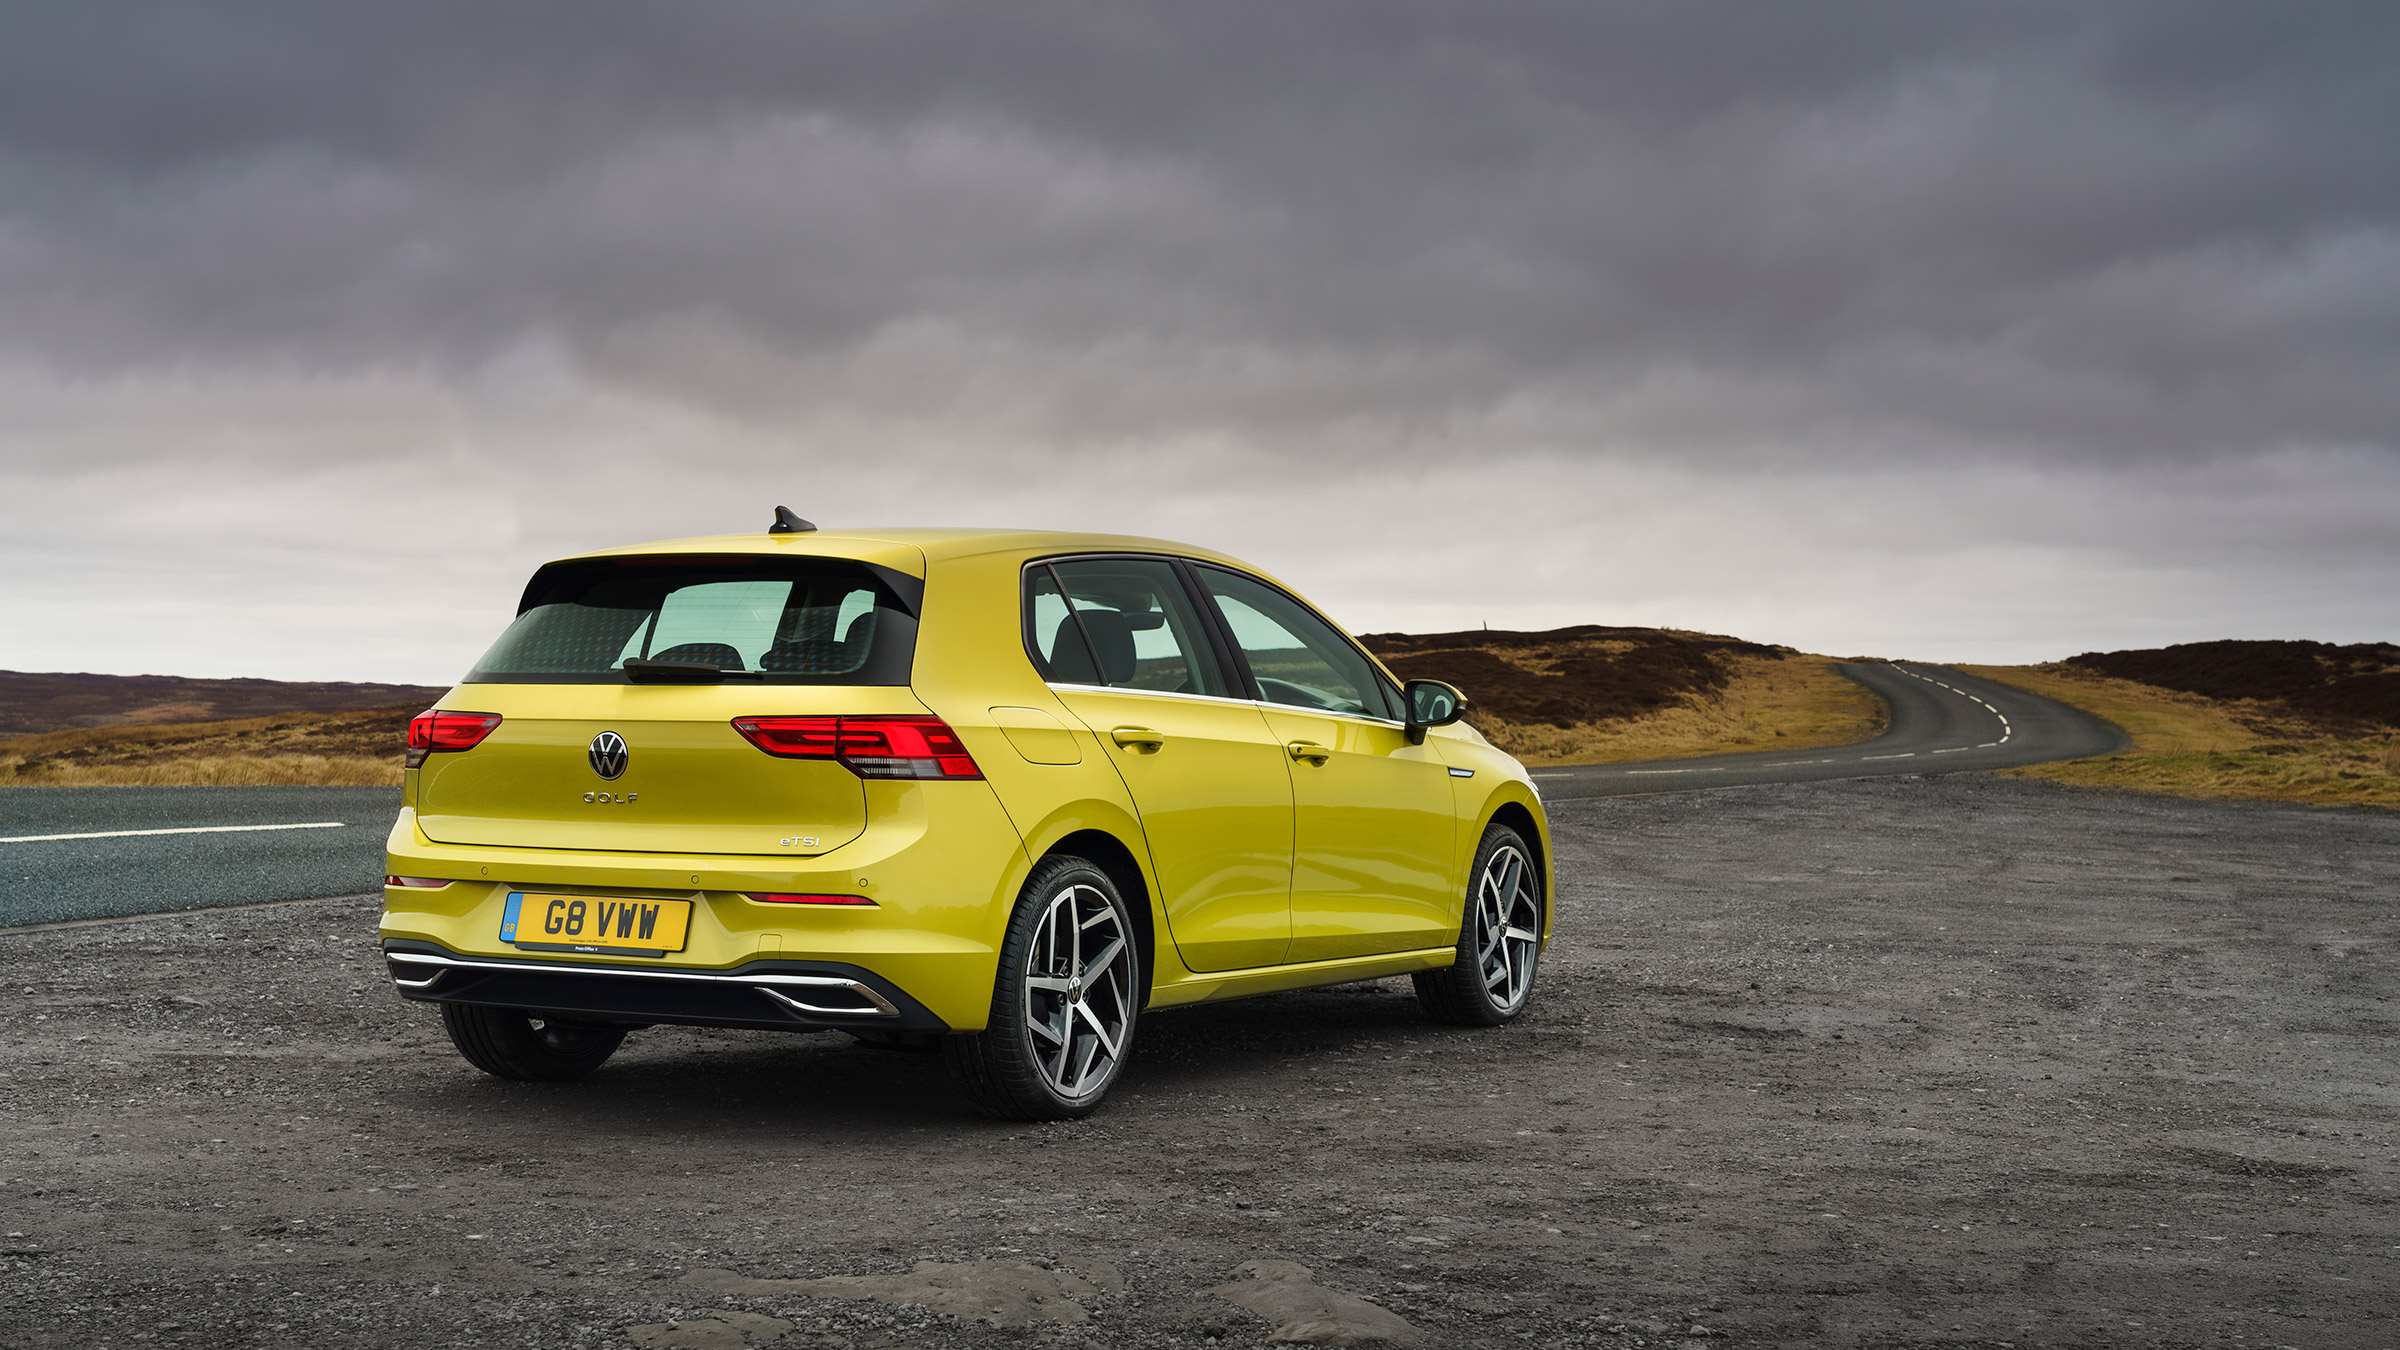 Volkswagen Golf 1 5 Tsi Review An Encouraging Base For The Next Gti Evo